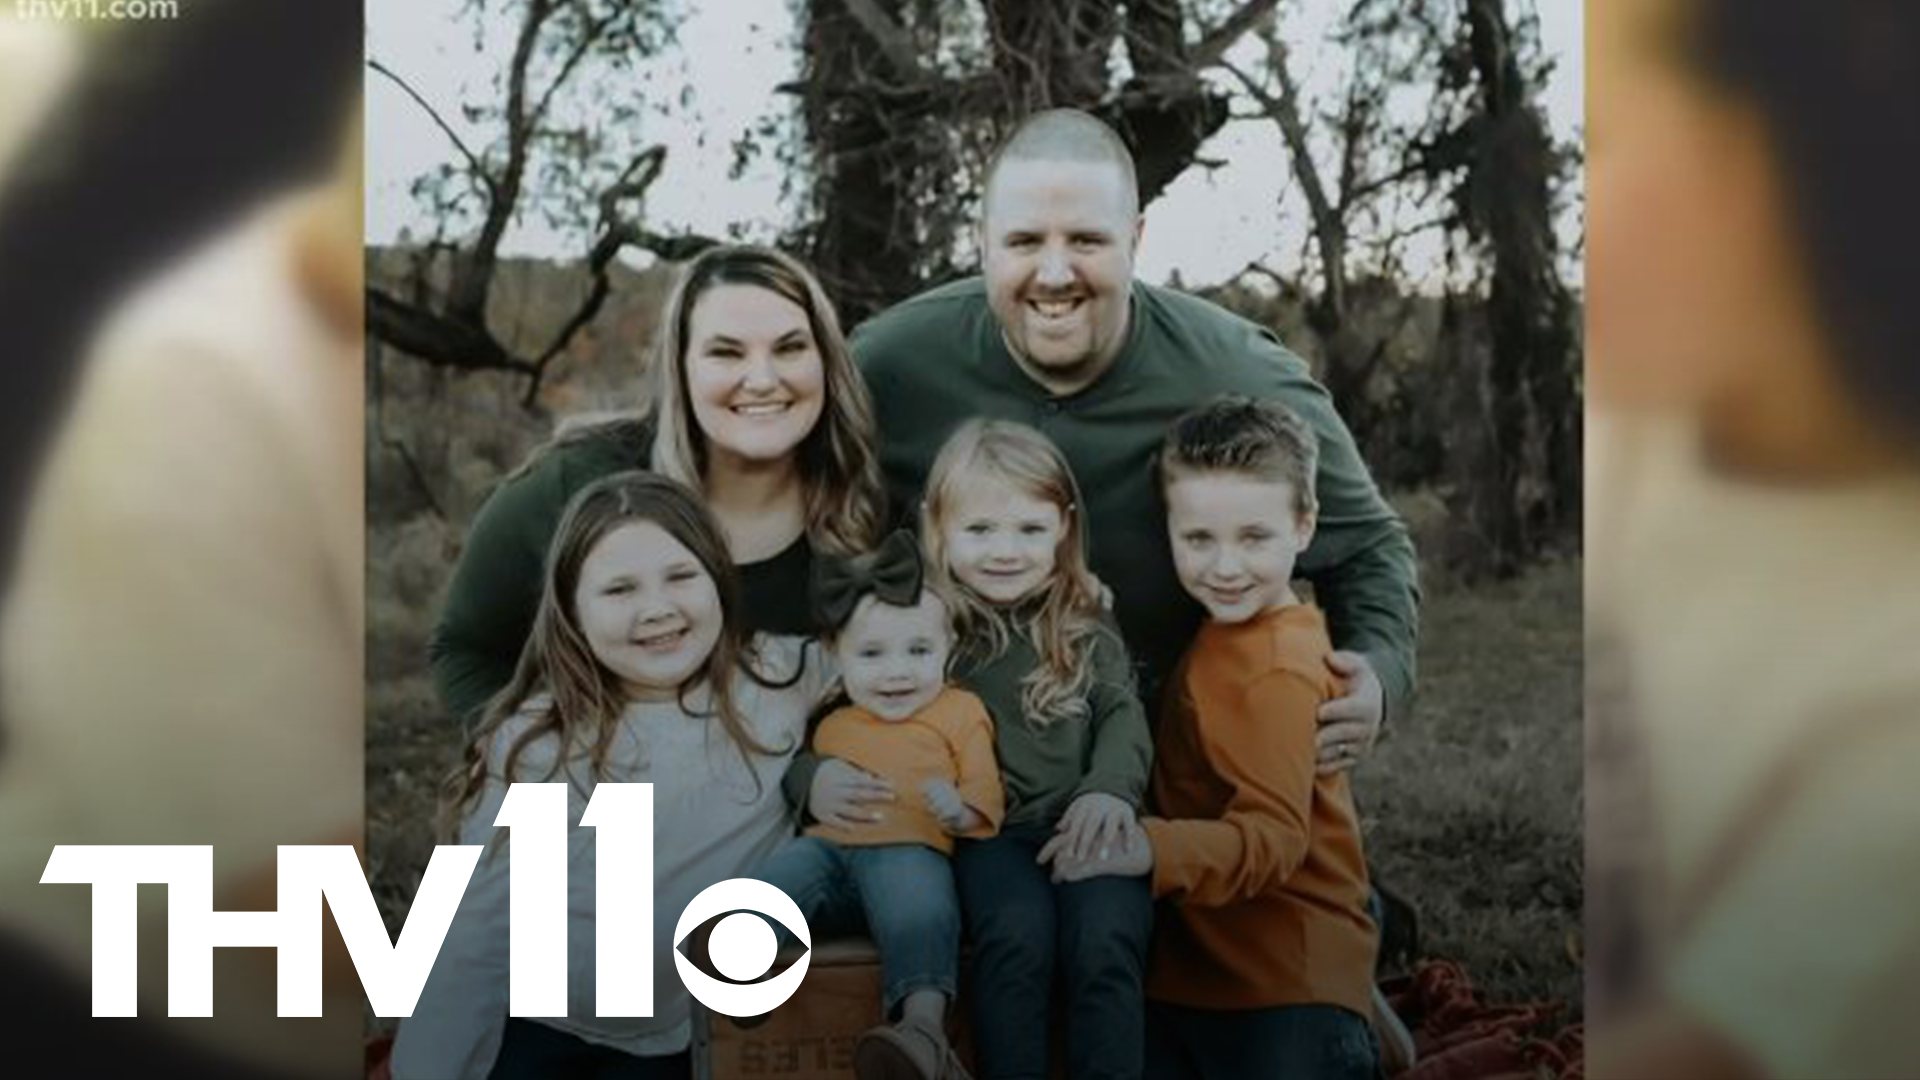 Emily Bennett has been married to her husband Chad for 8 years. They have four young children; Mackenzie, 7, Easton, 6, Savannah, 4 and 1-year-old Paisley.